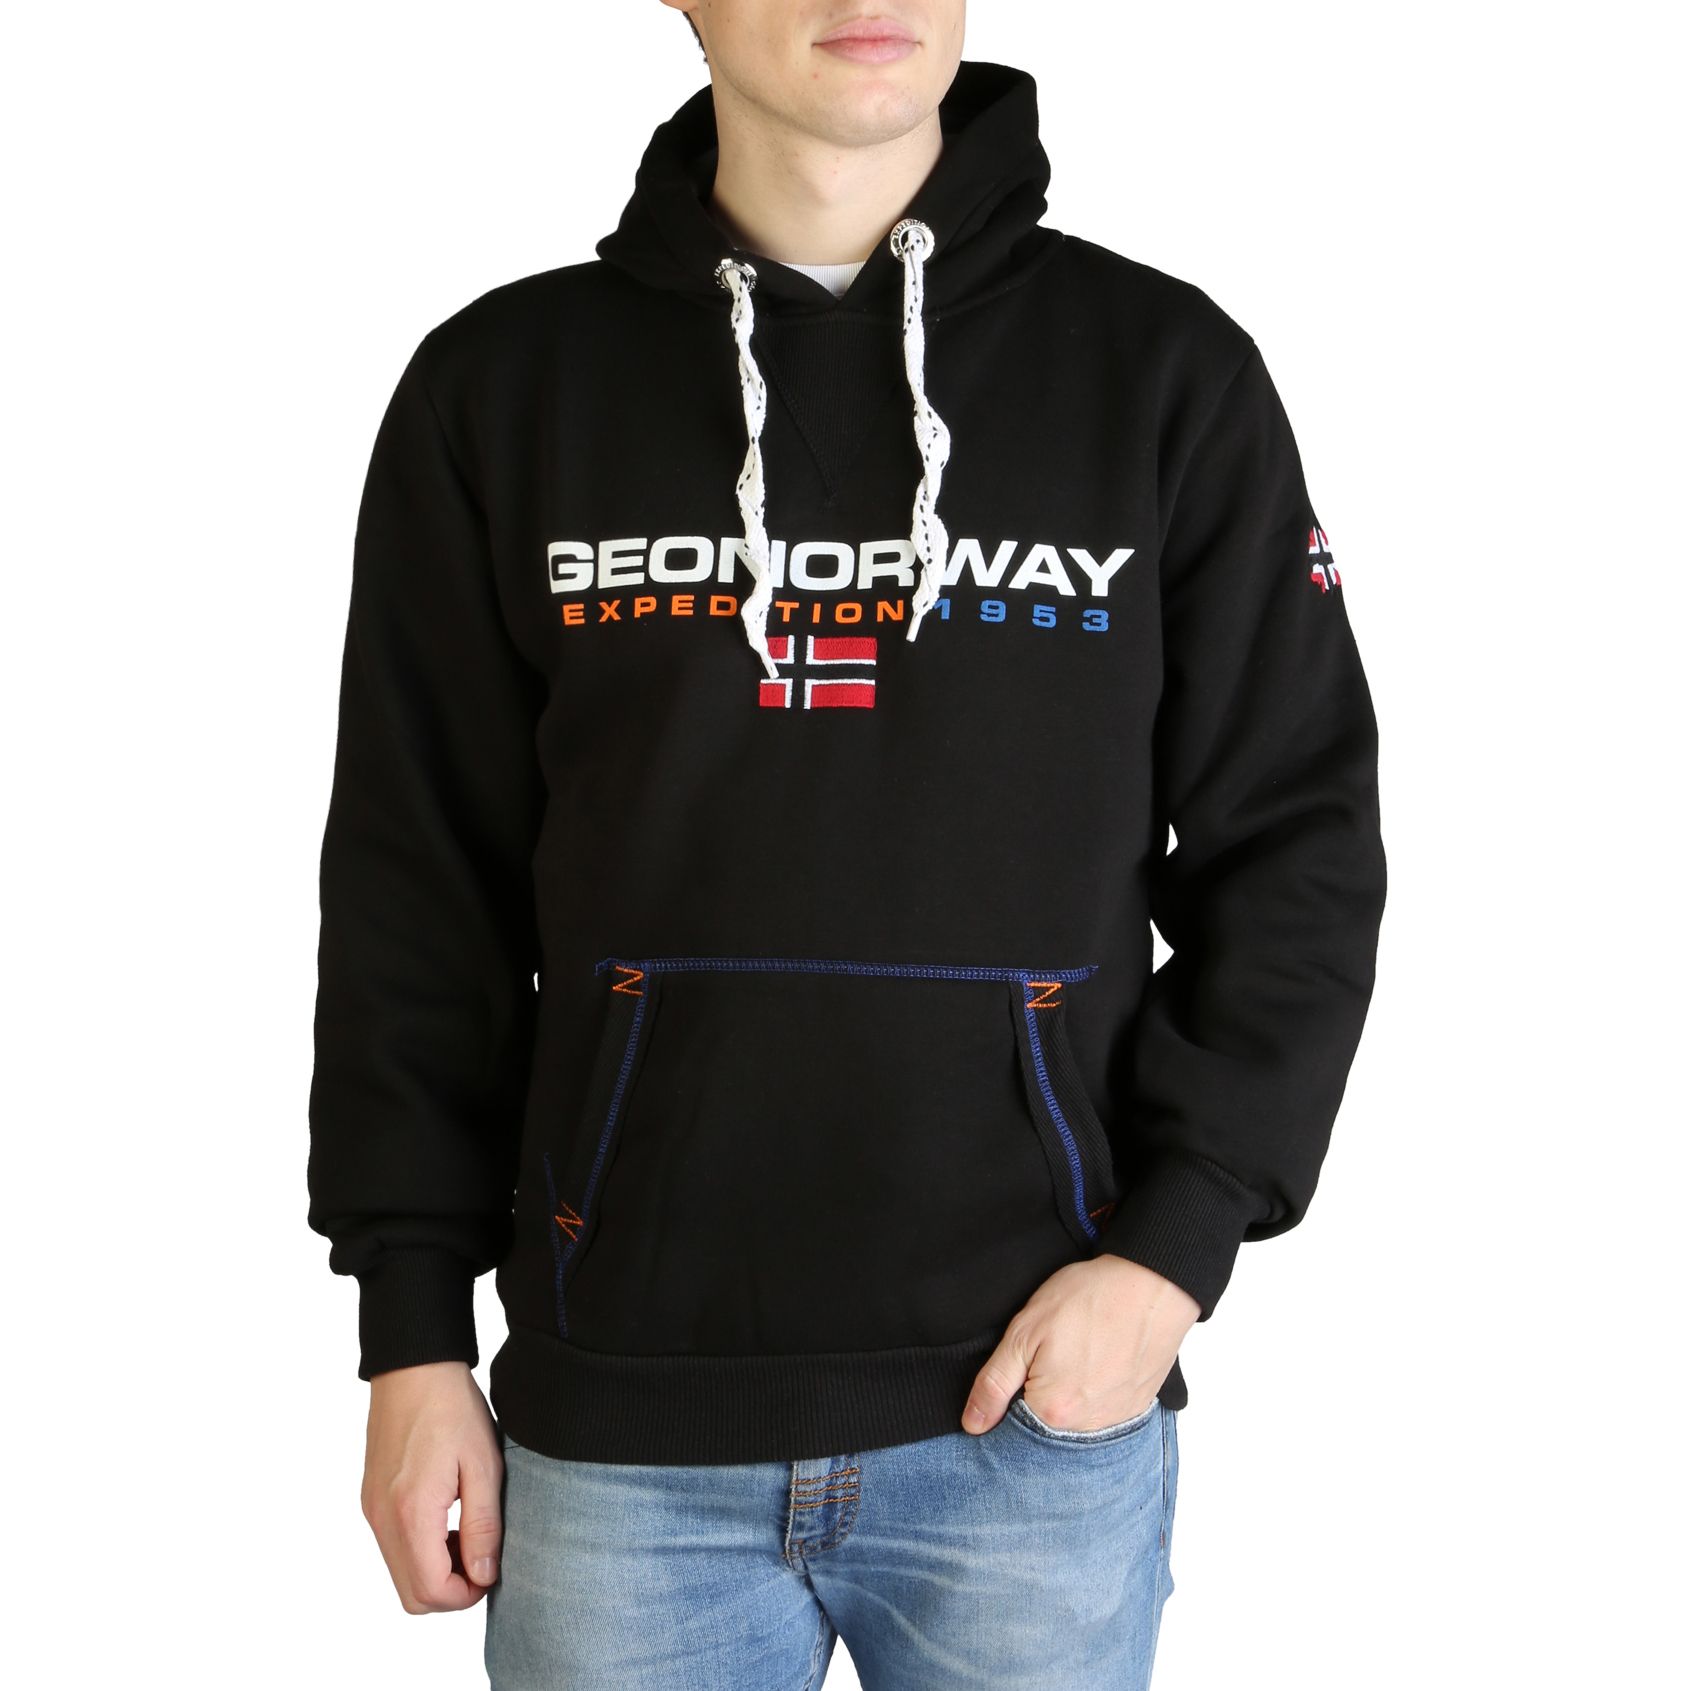 Vêtements sweat-shirts geographical norway homme s